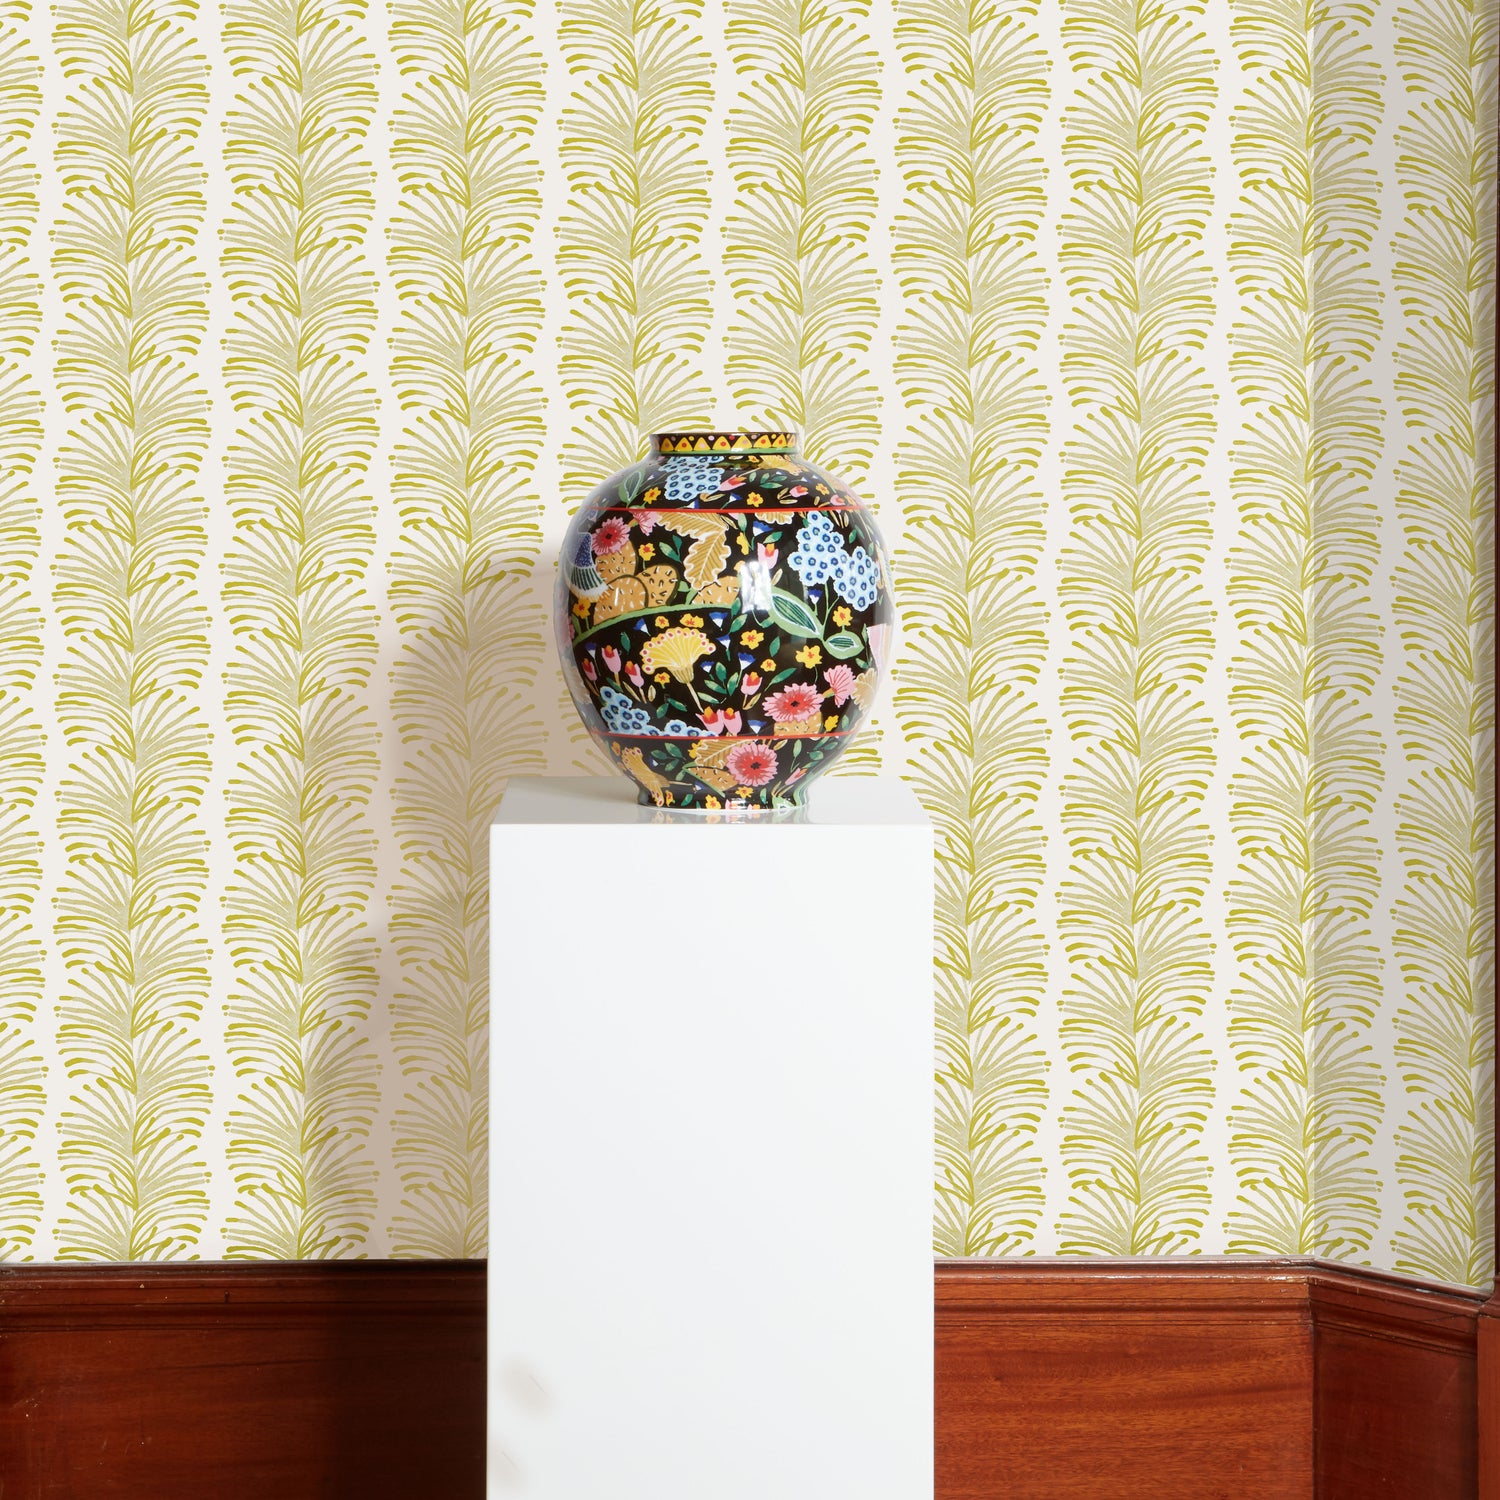 Yellow Stripe Chartreuse Printed Wallpaper with a black floral vase on a white squared stand